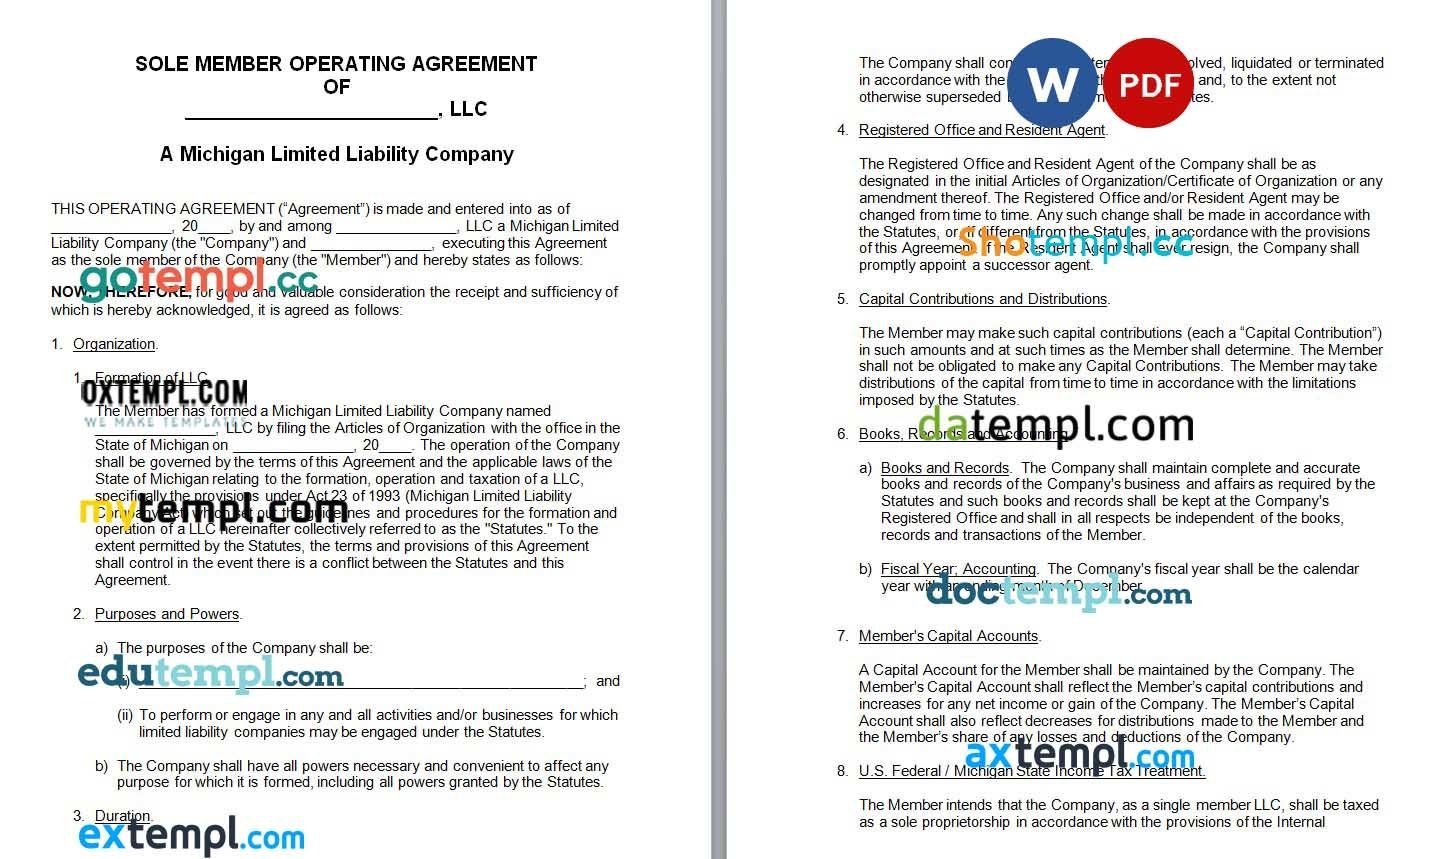 Michigan Single-Member LLC Operating Agreement Word example, completely editable